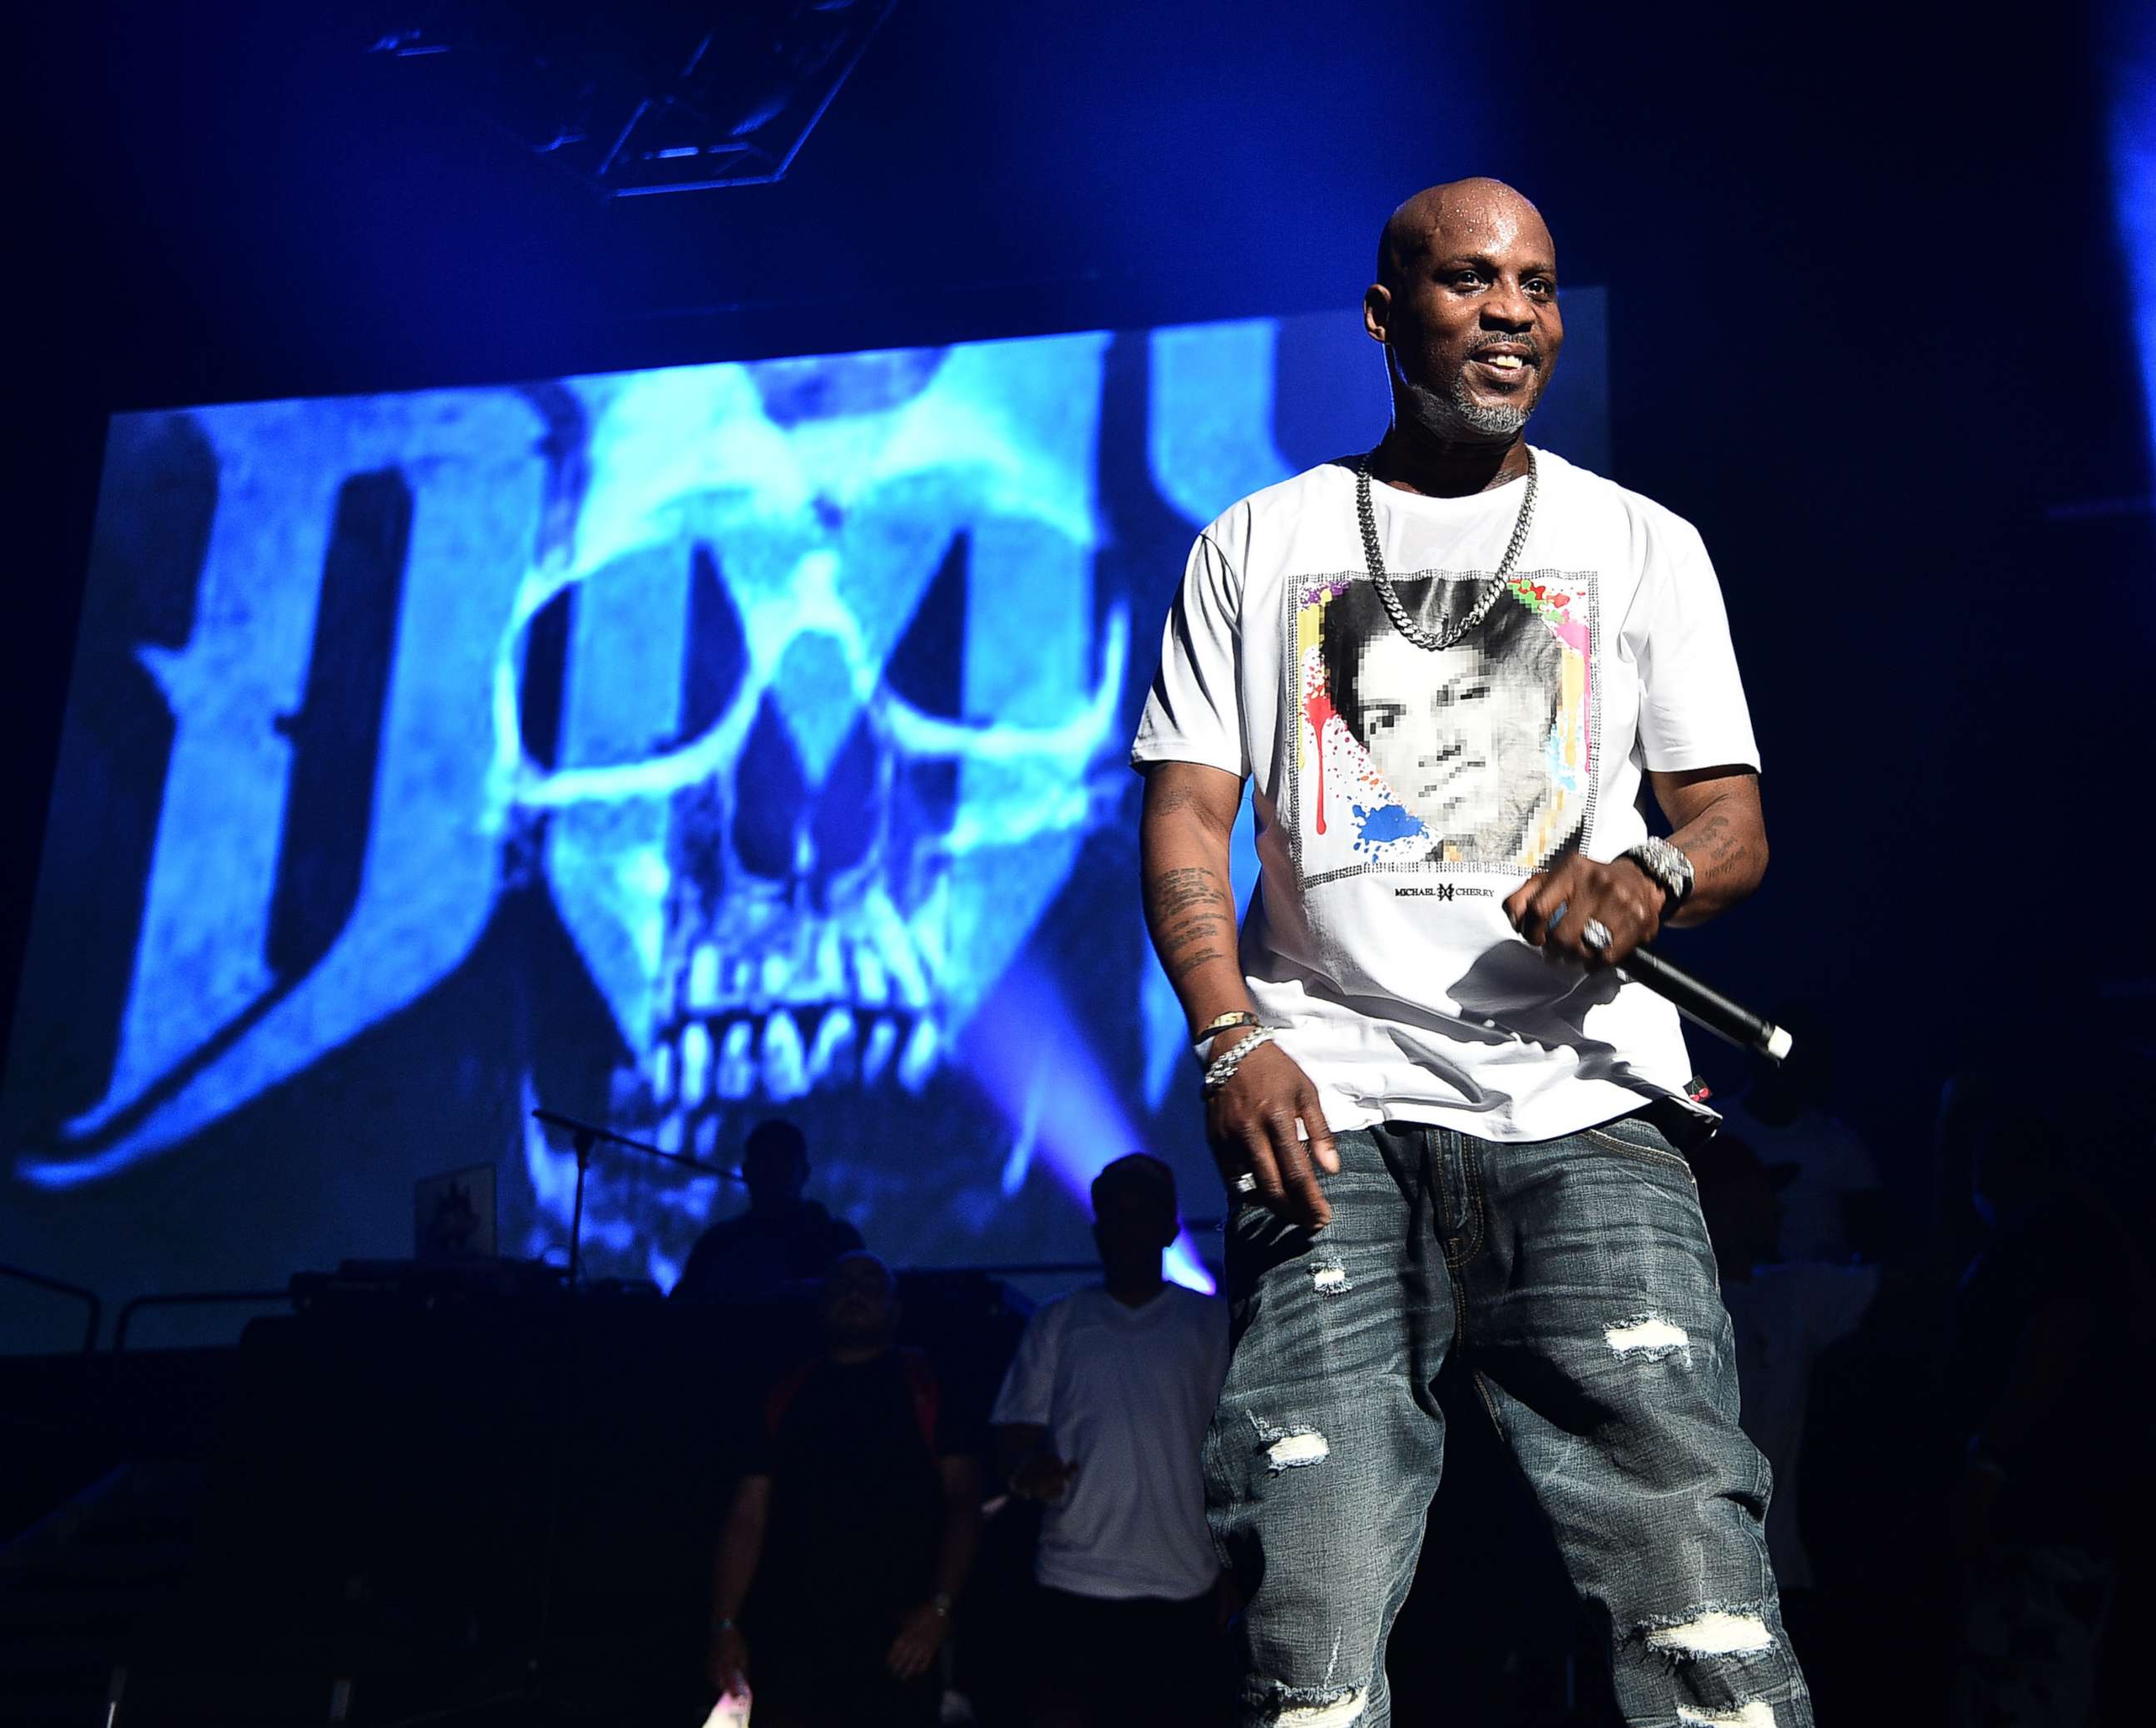 PHOTO: DMX performs at Barclays Center in New York on June 28, 2019.